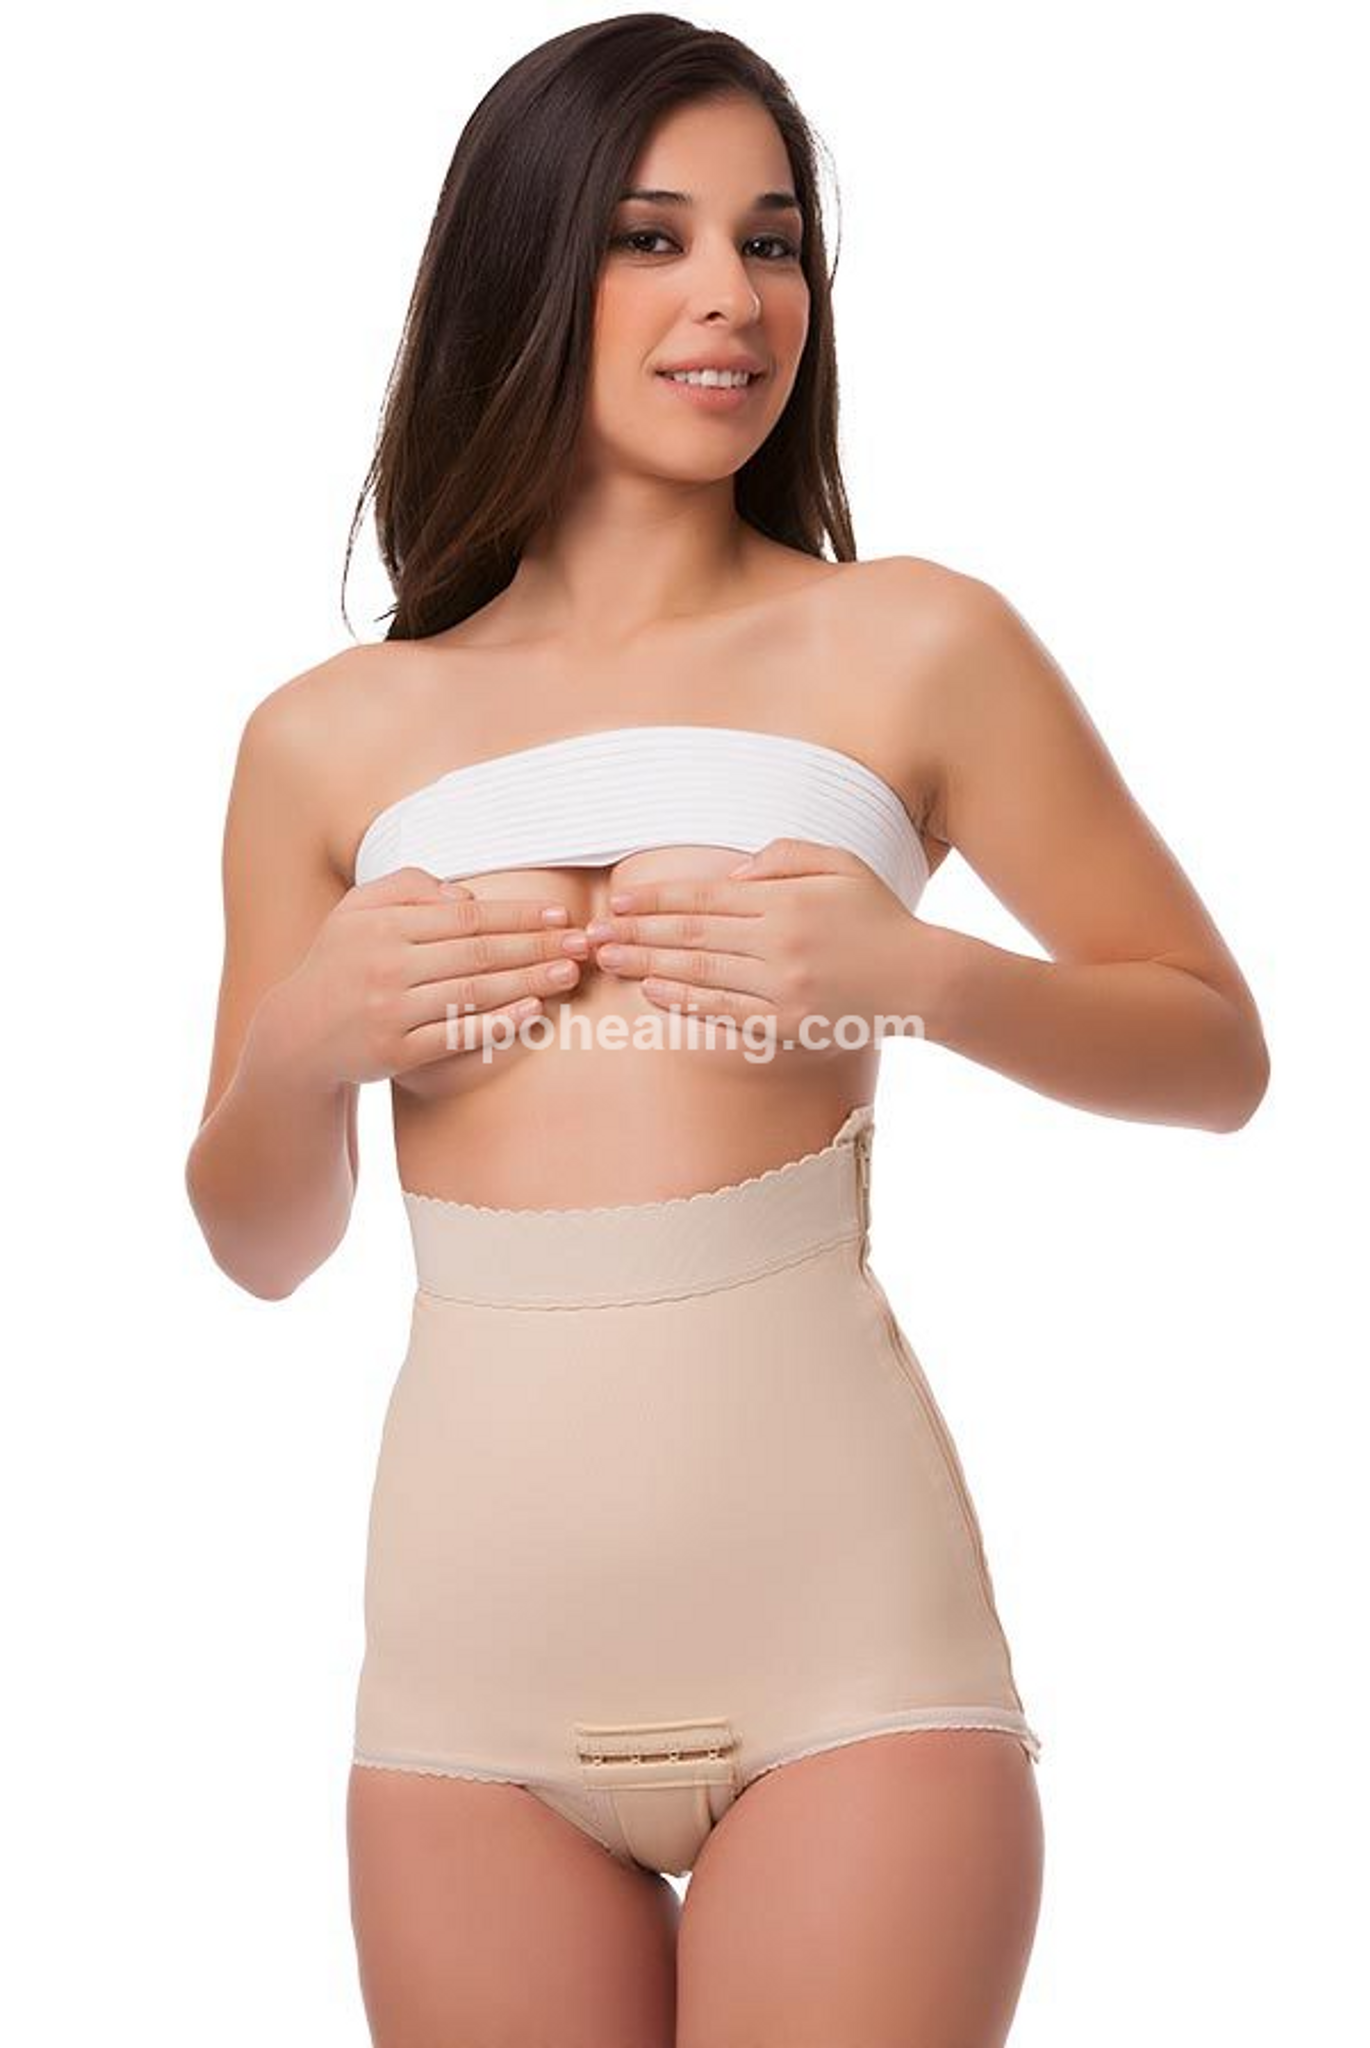 Breast Lift Implant Stabilizer Band Compression Bra Post Surgery